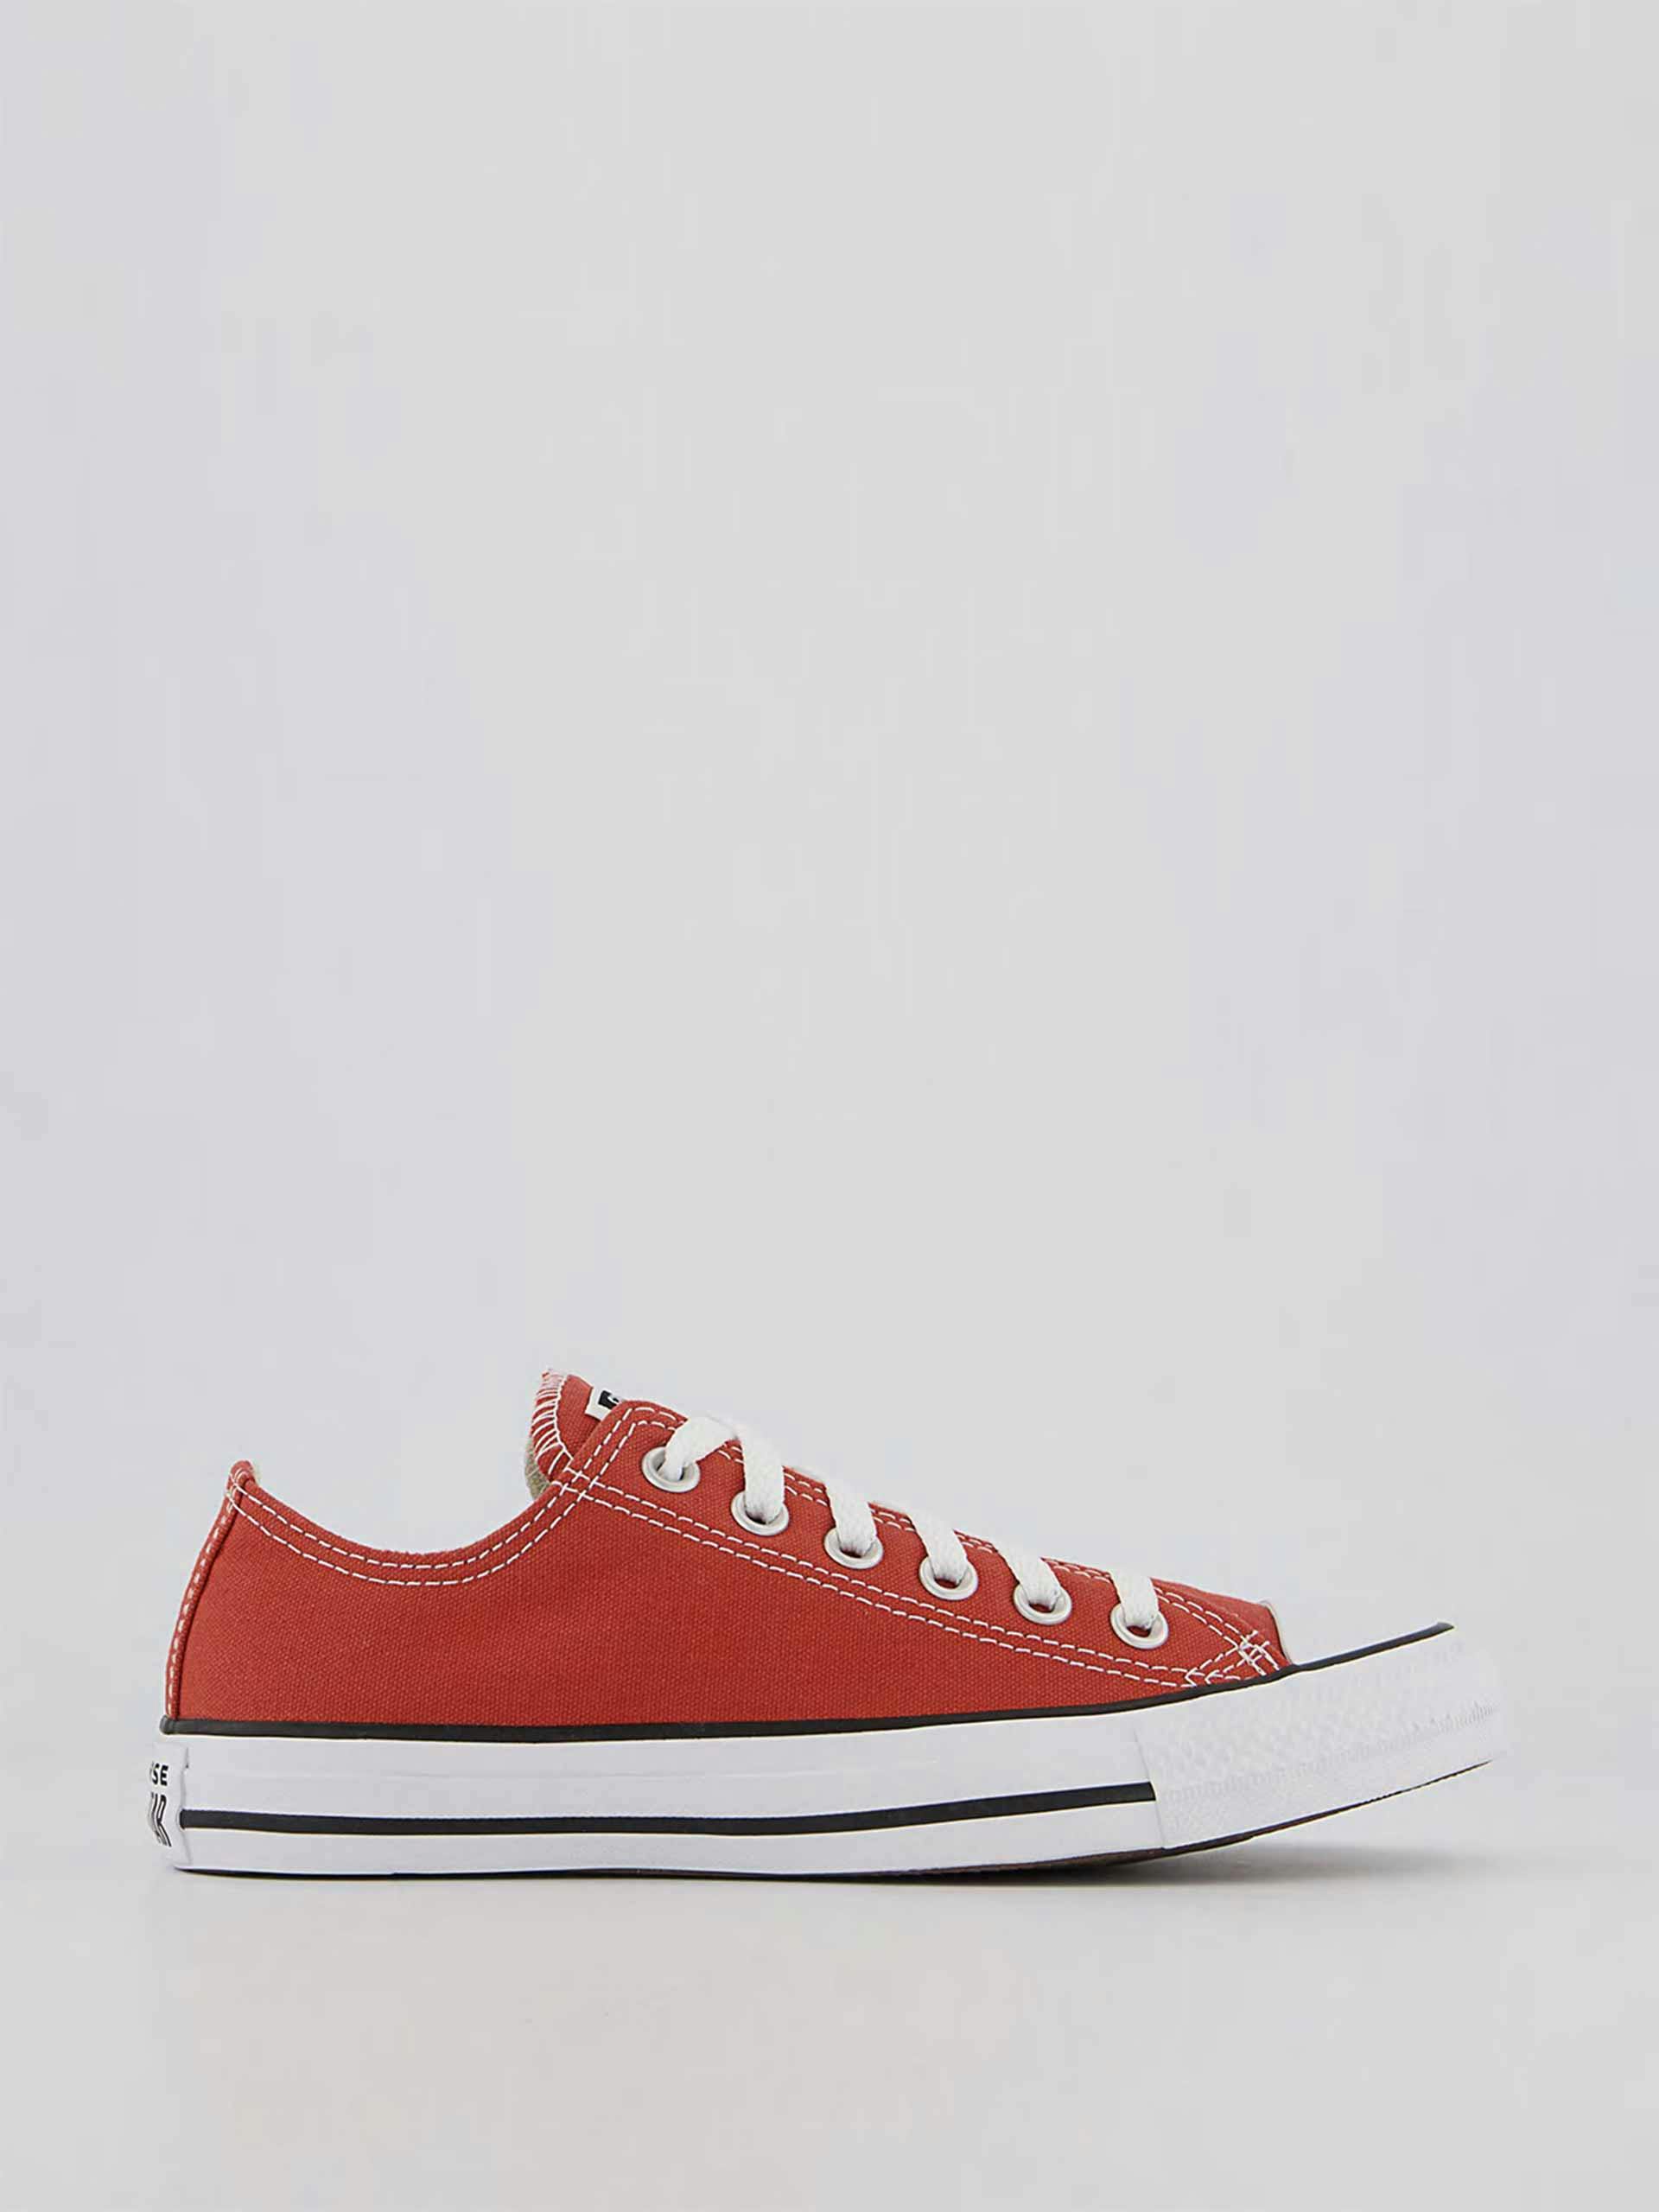 Red low top trainers